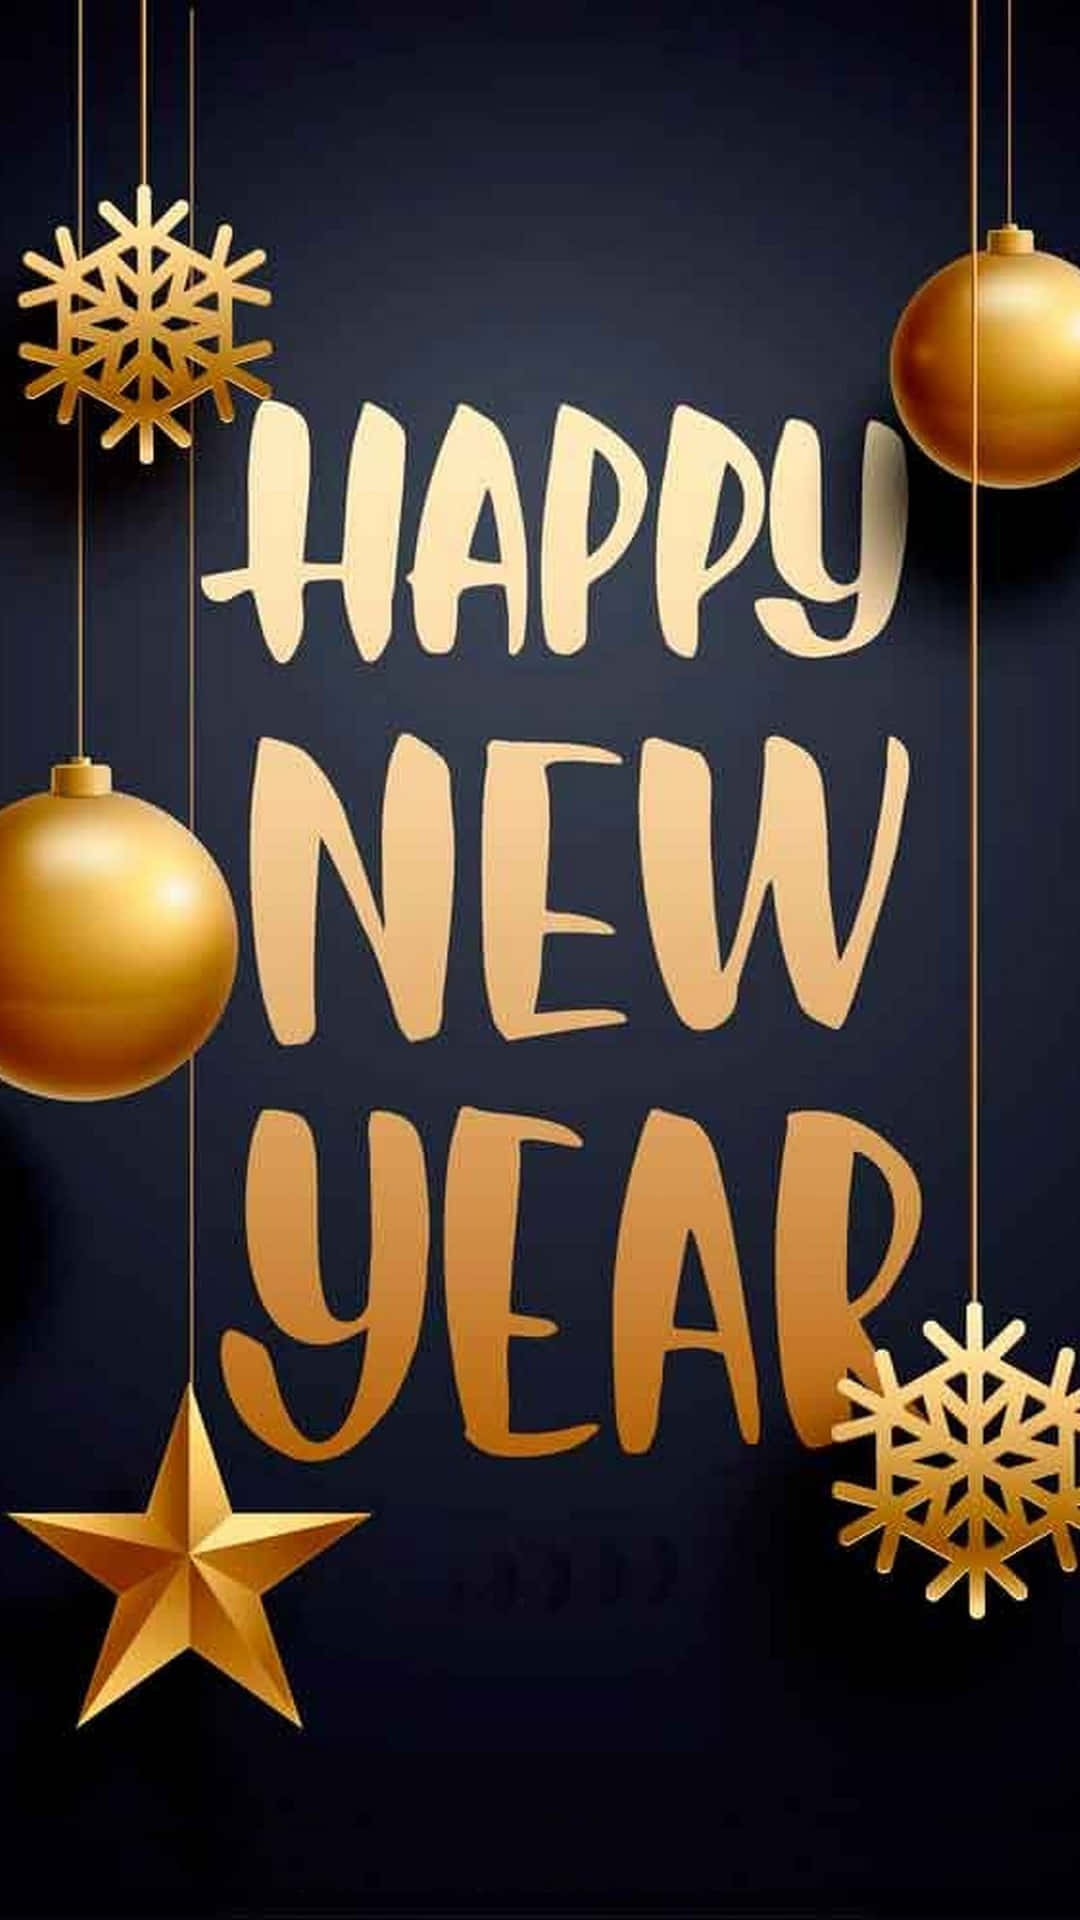 Happy New Year Gold Ornaments Iphone Wallpaper